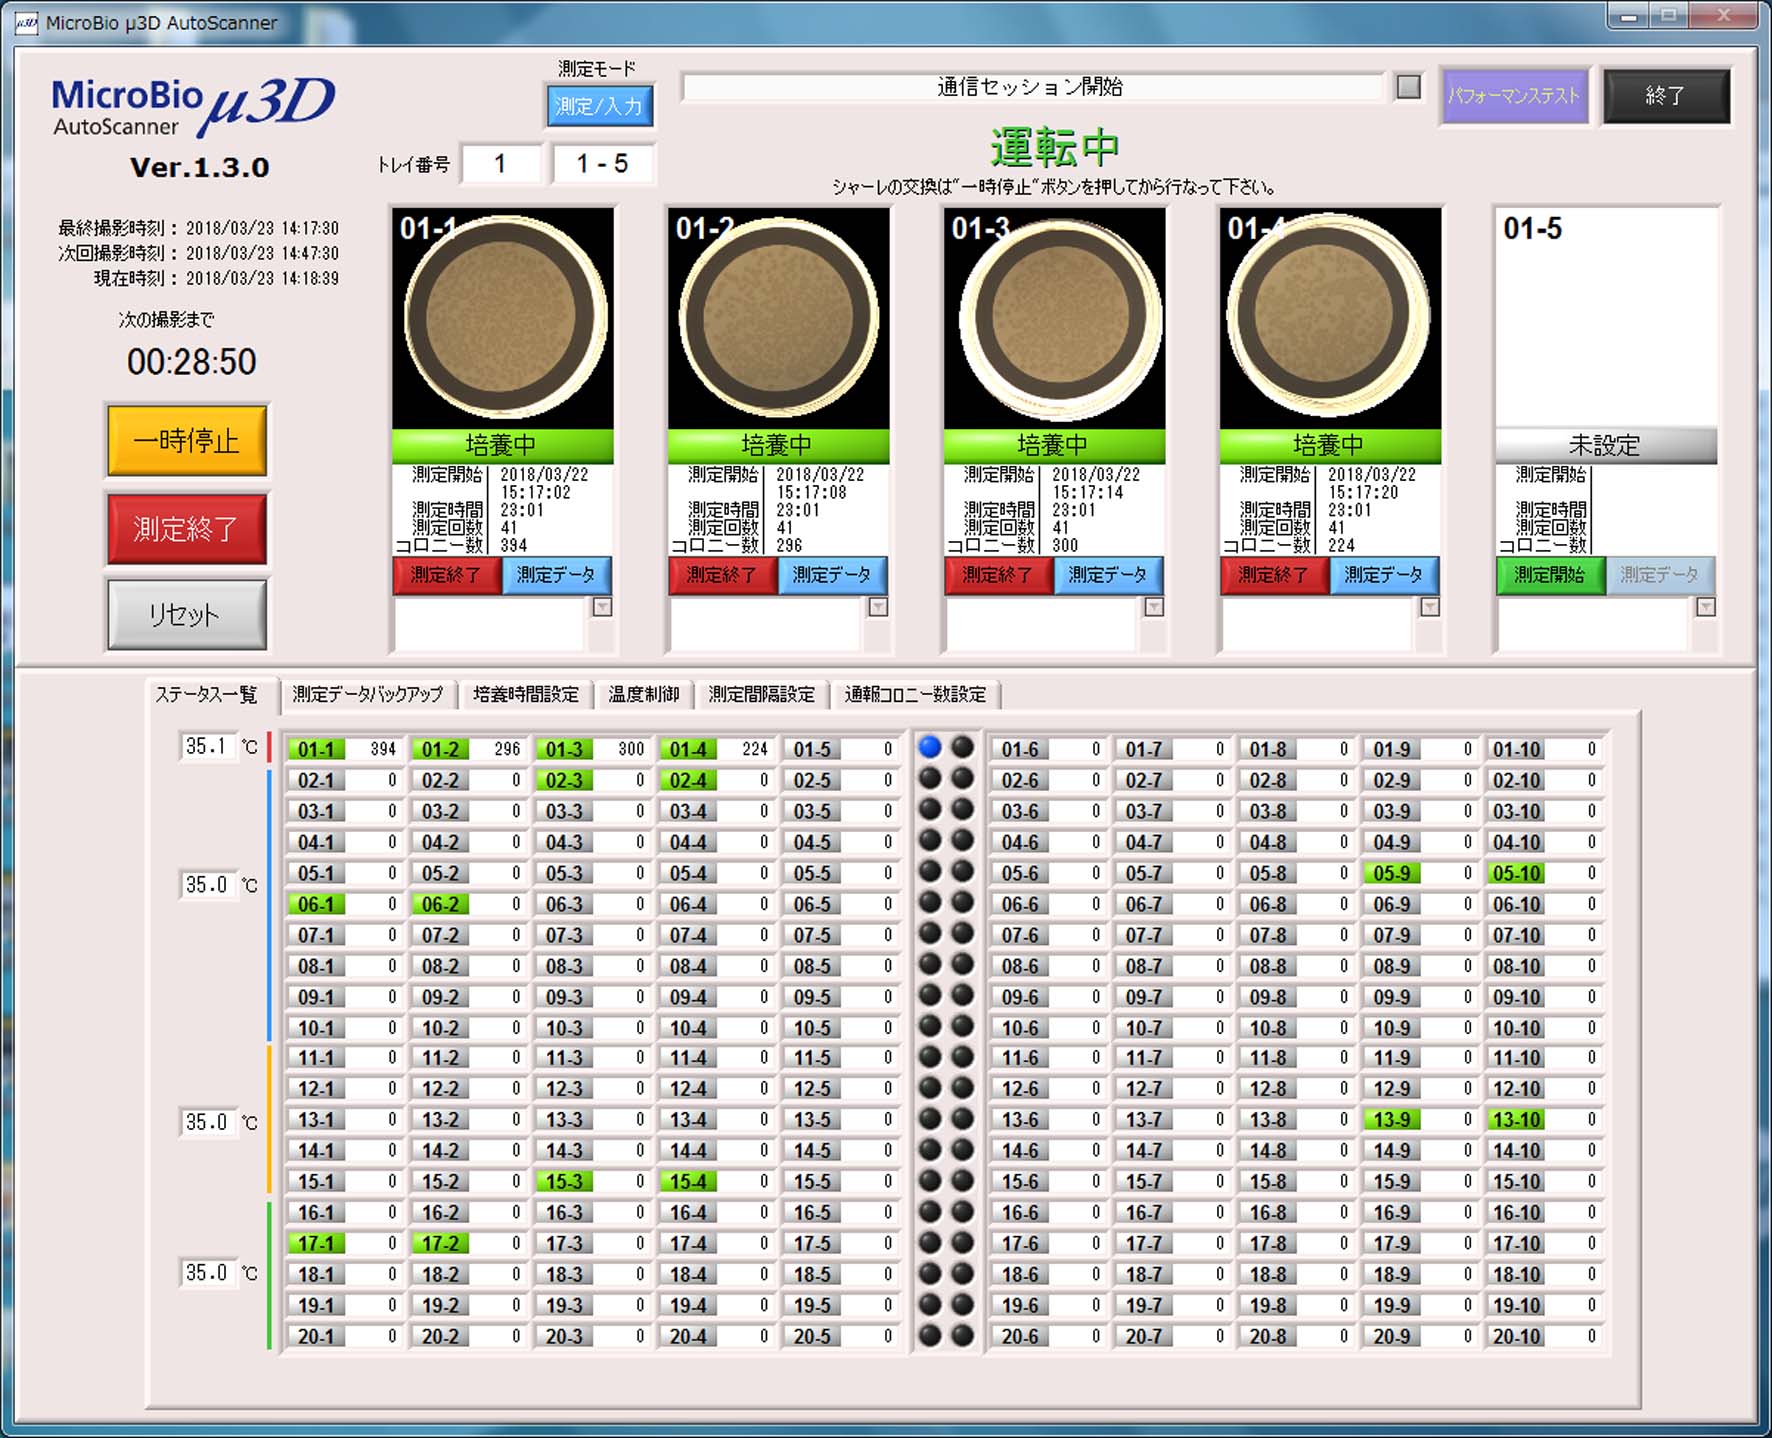 Microbial detection for 200 membrane filters is fully automated.